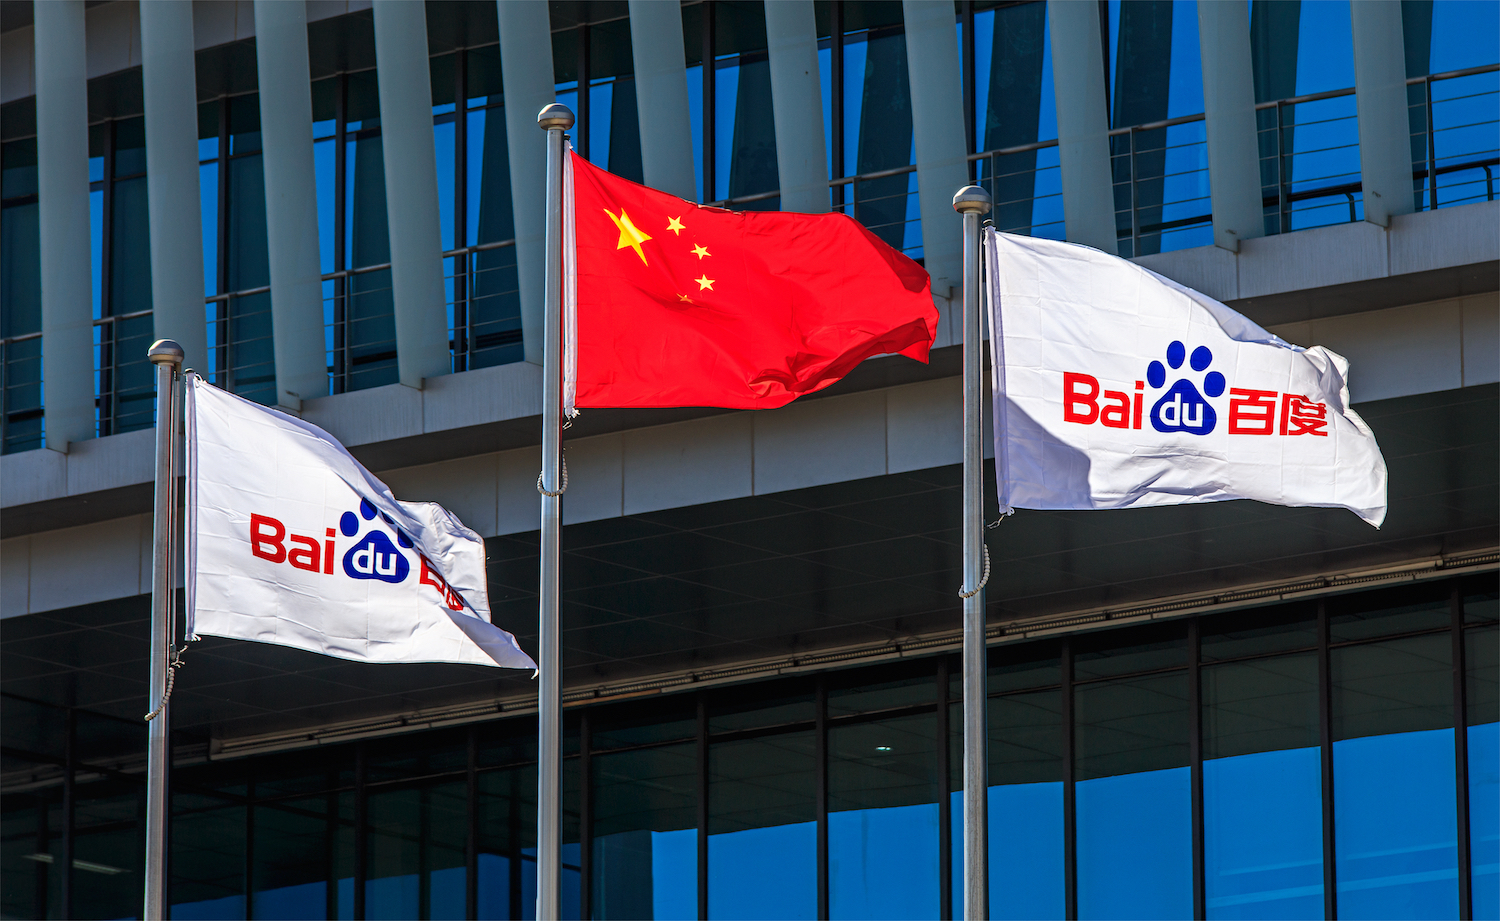 Baidu Provides Service to Assist Builders, Small Companies Construct Dapps